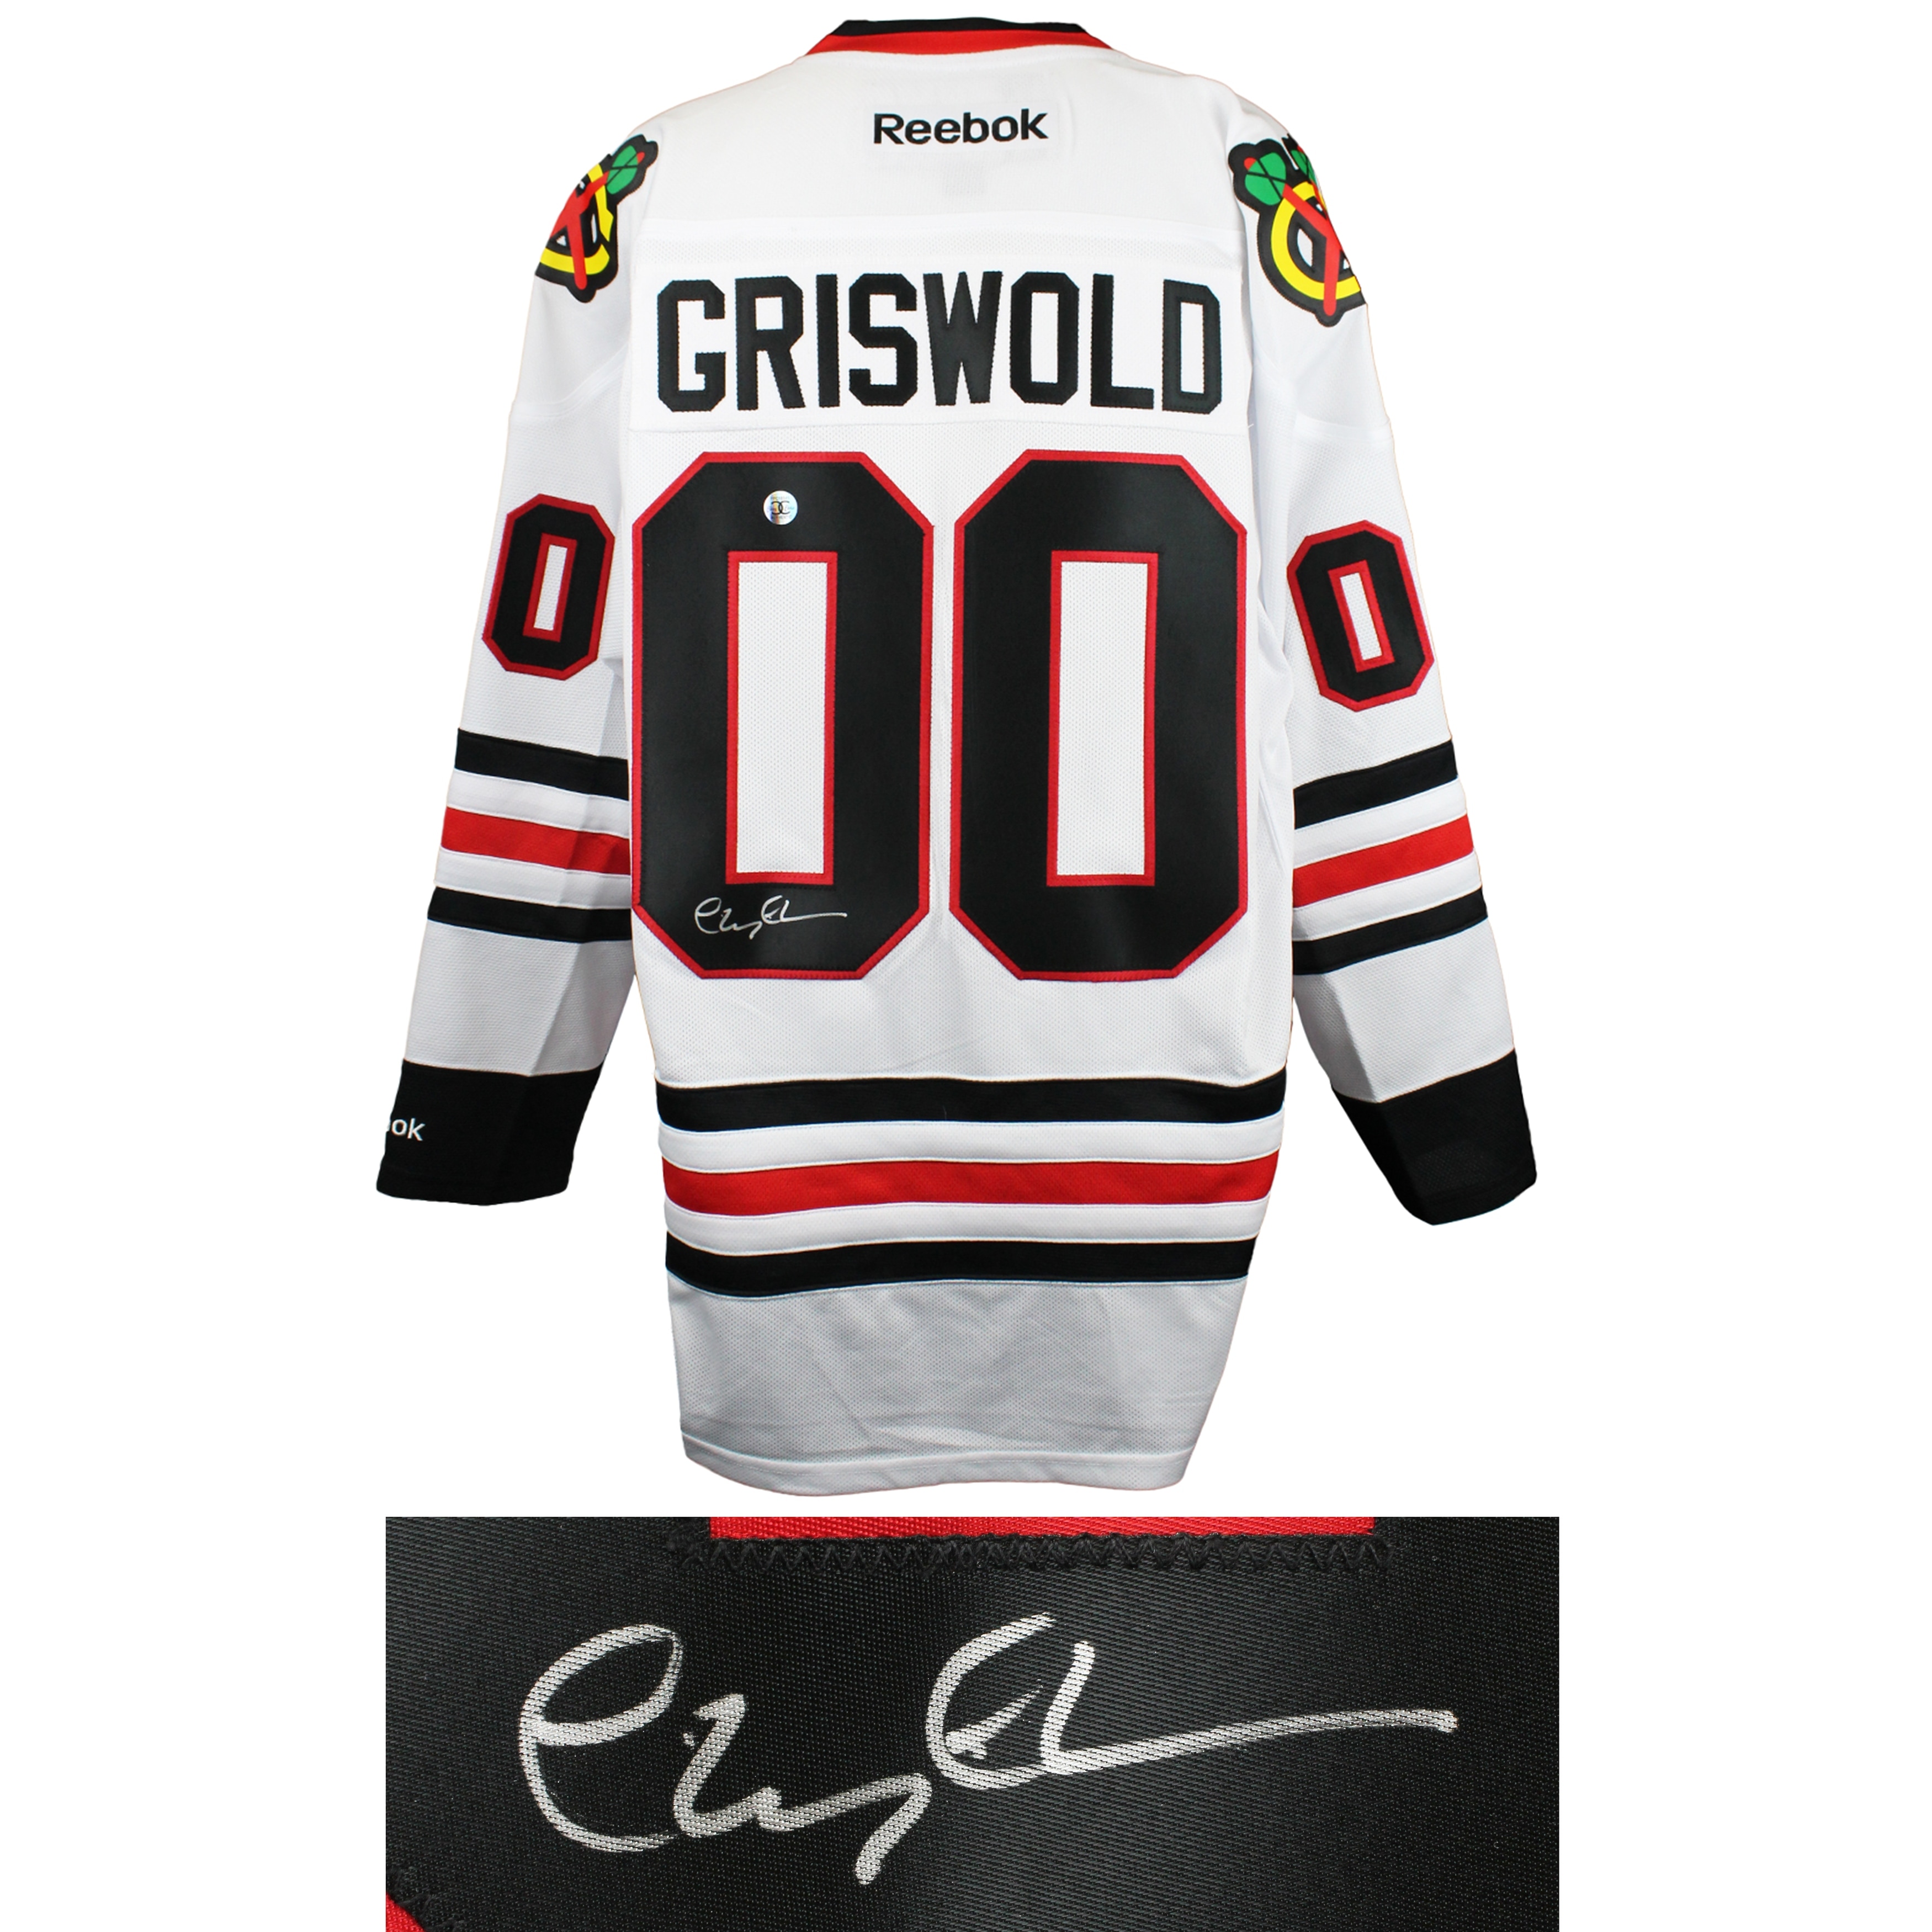 griswold 00 jersey